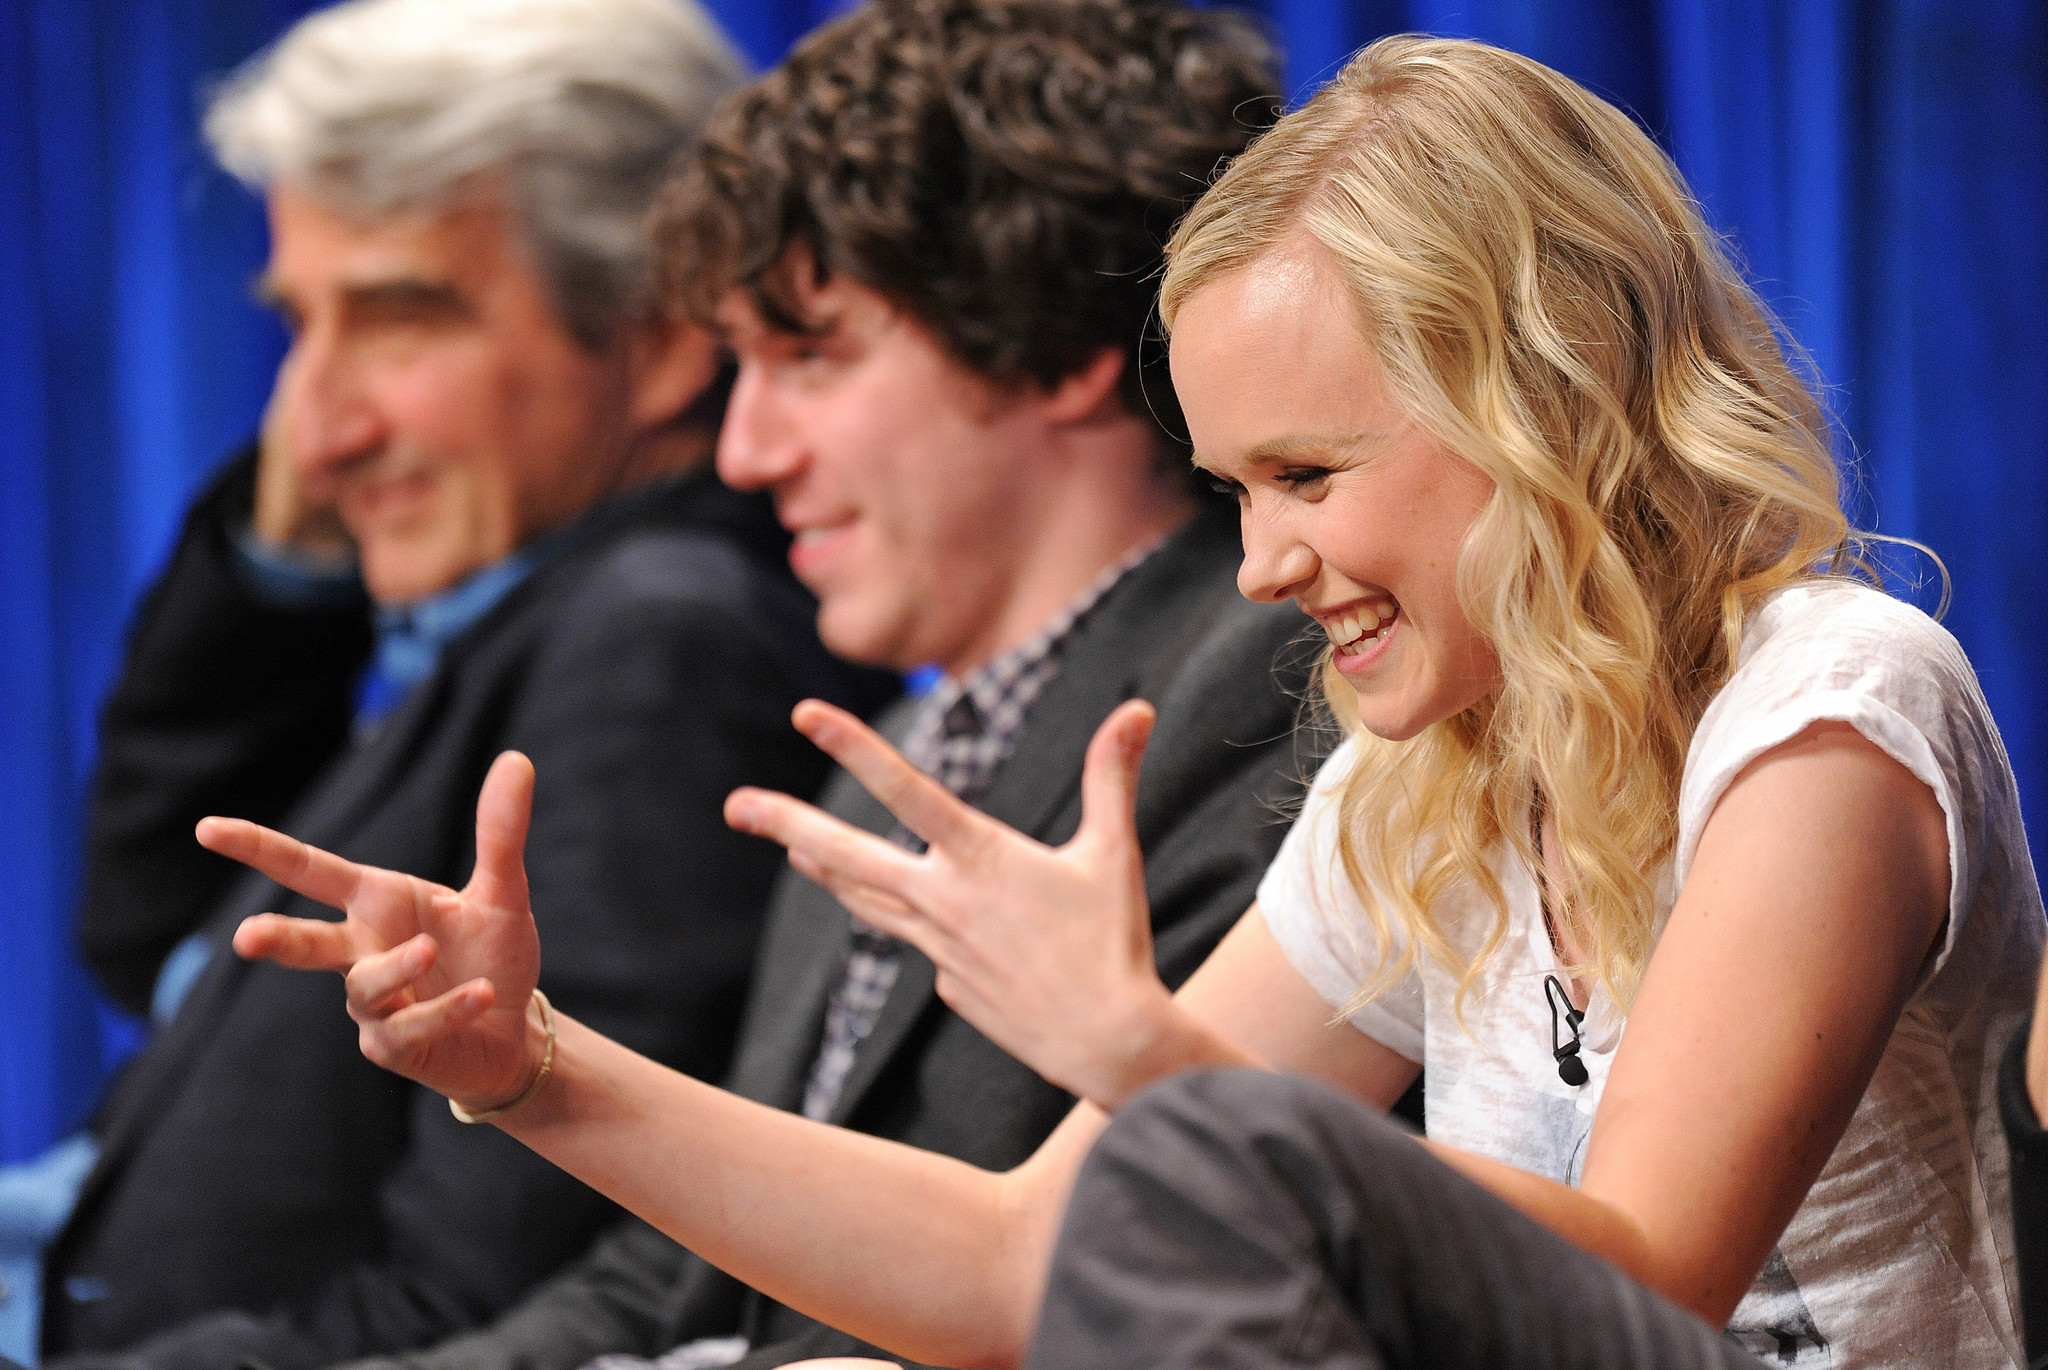 Sam Waterston, John Gallagher Jr. and Alison Pill at event of The Newsroom (2012)